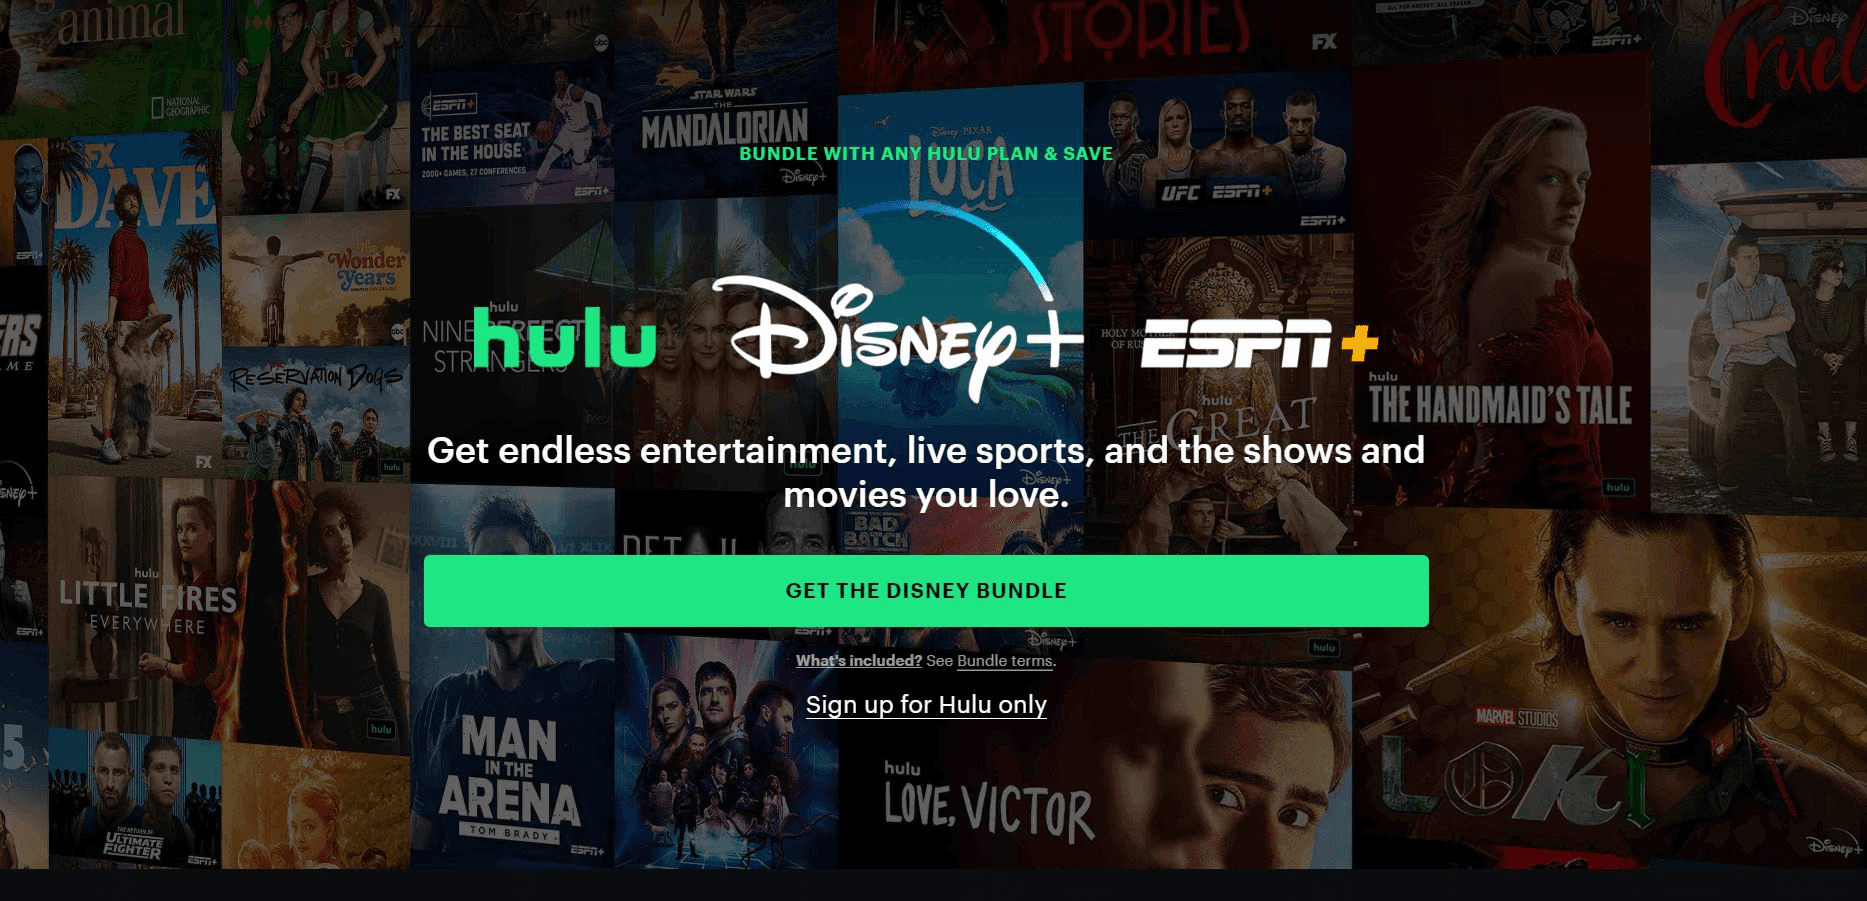 Choose what to watch from the program page.